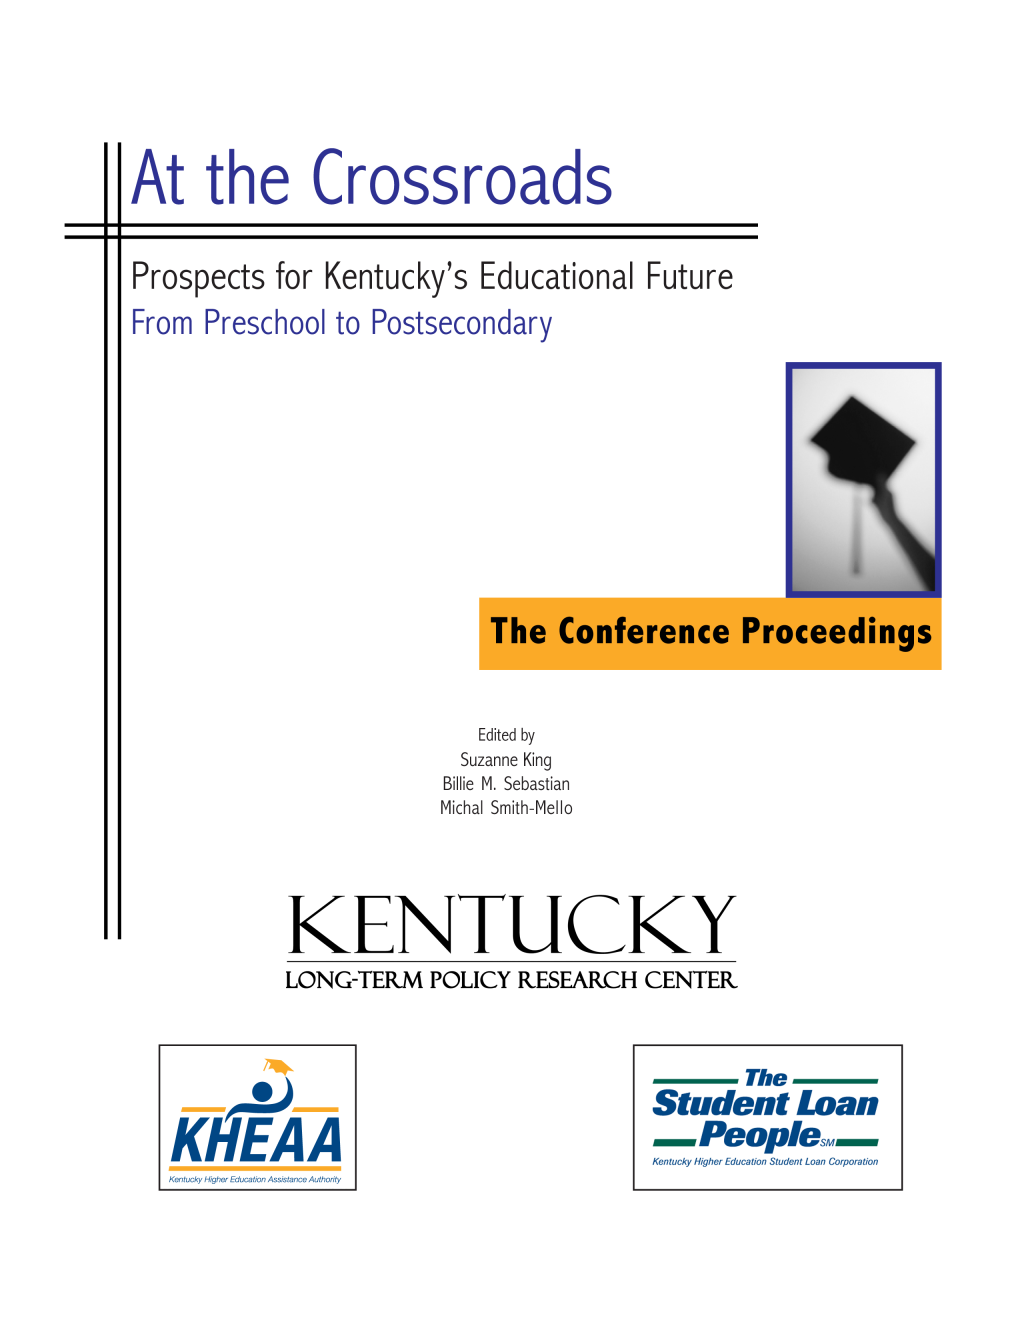 At the Crossroads: Prospects for Kentucky's Educational Future